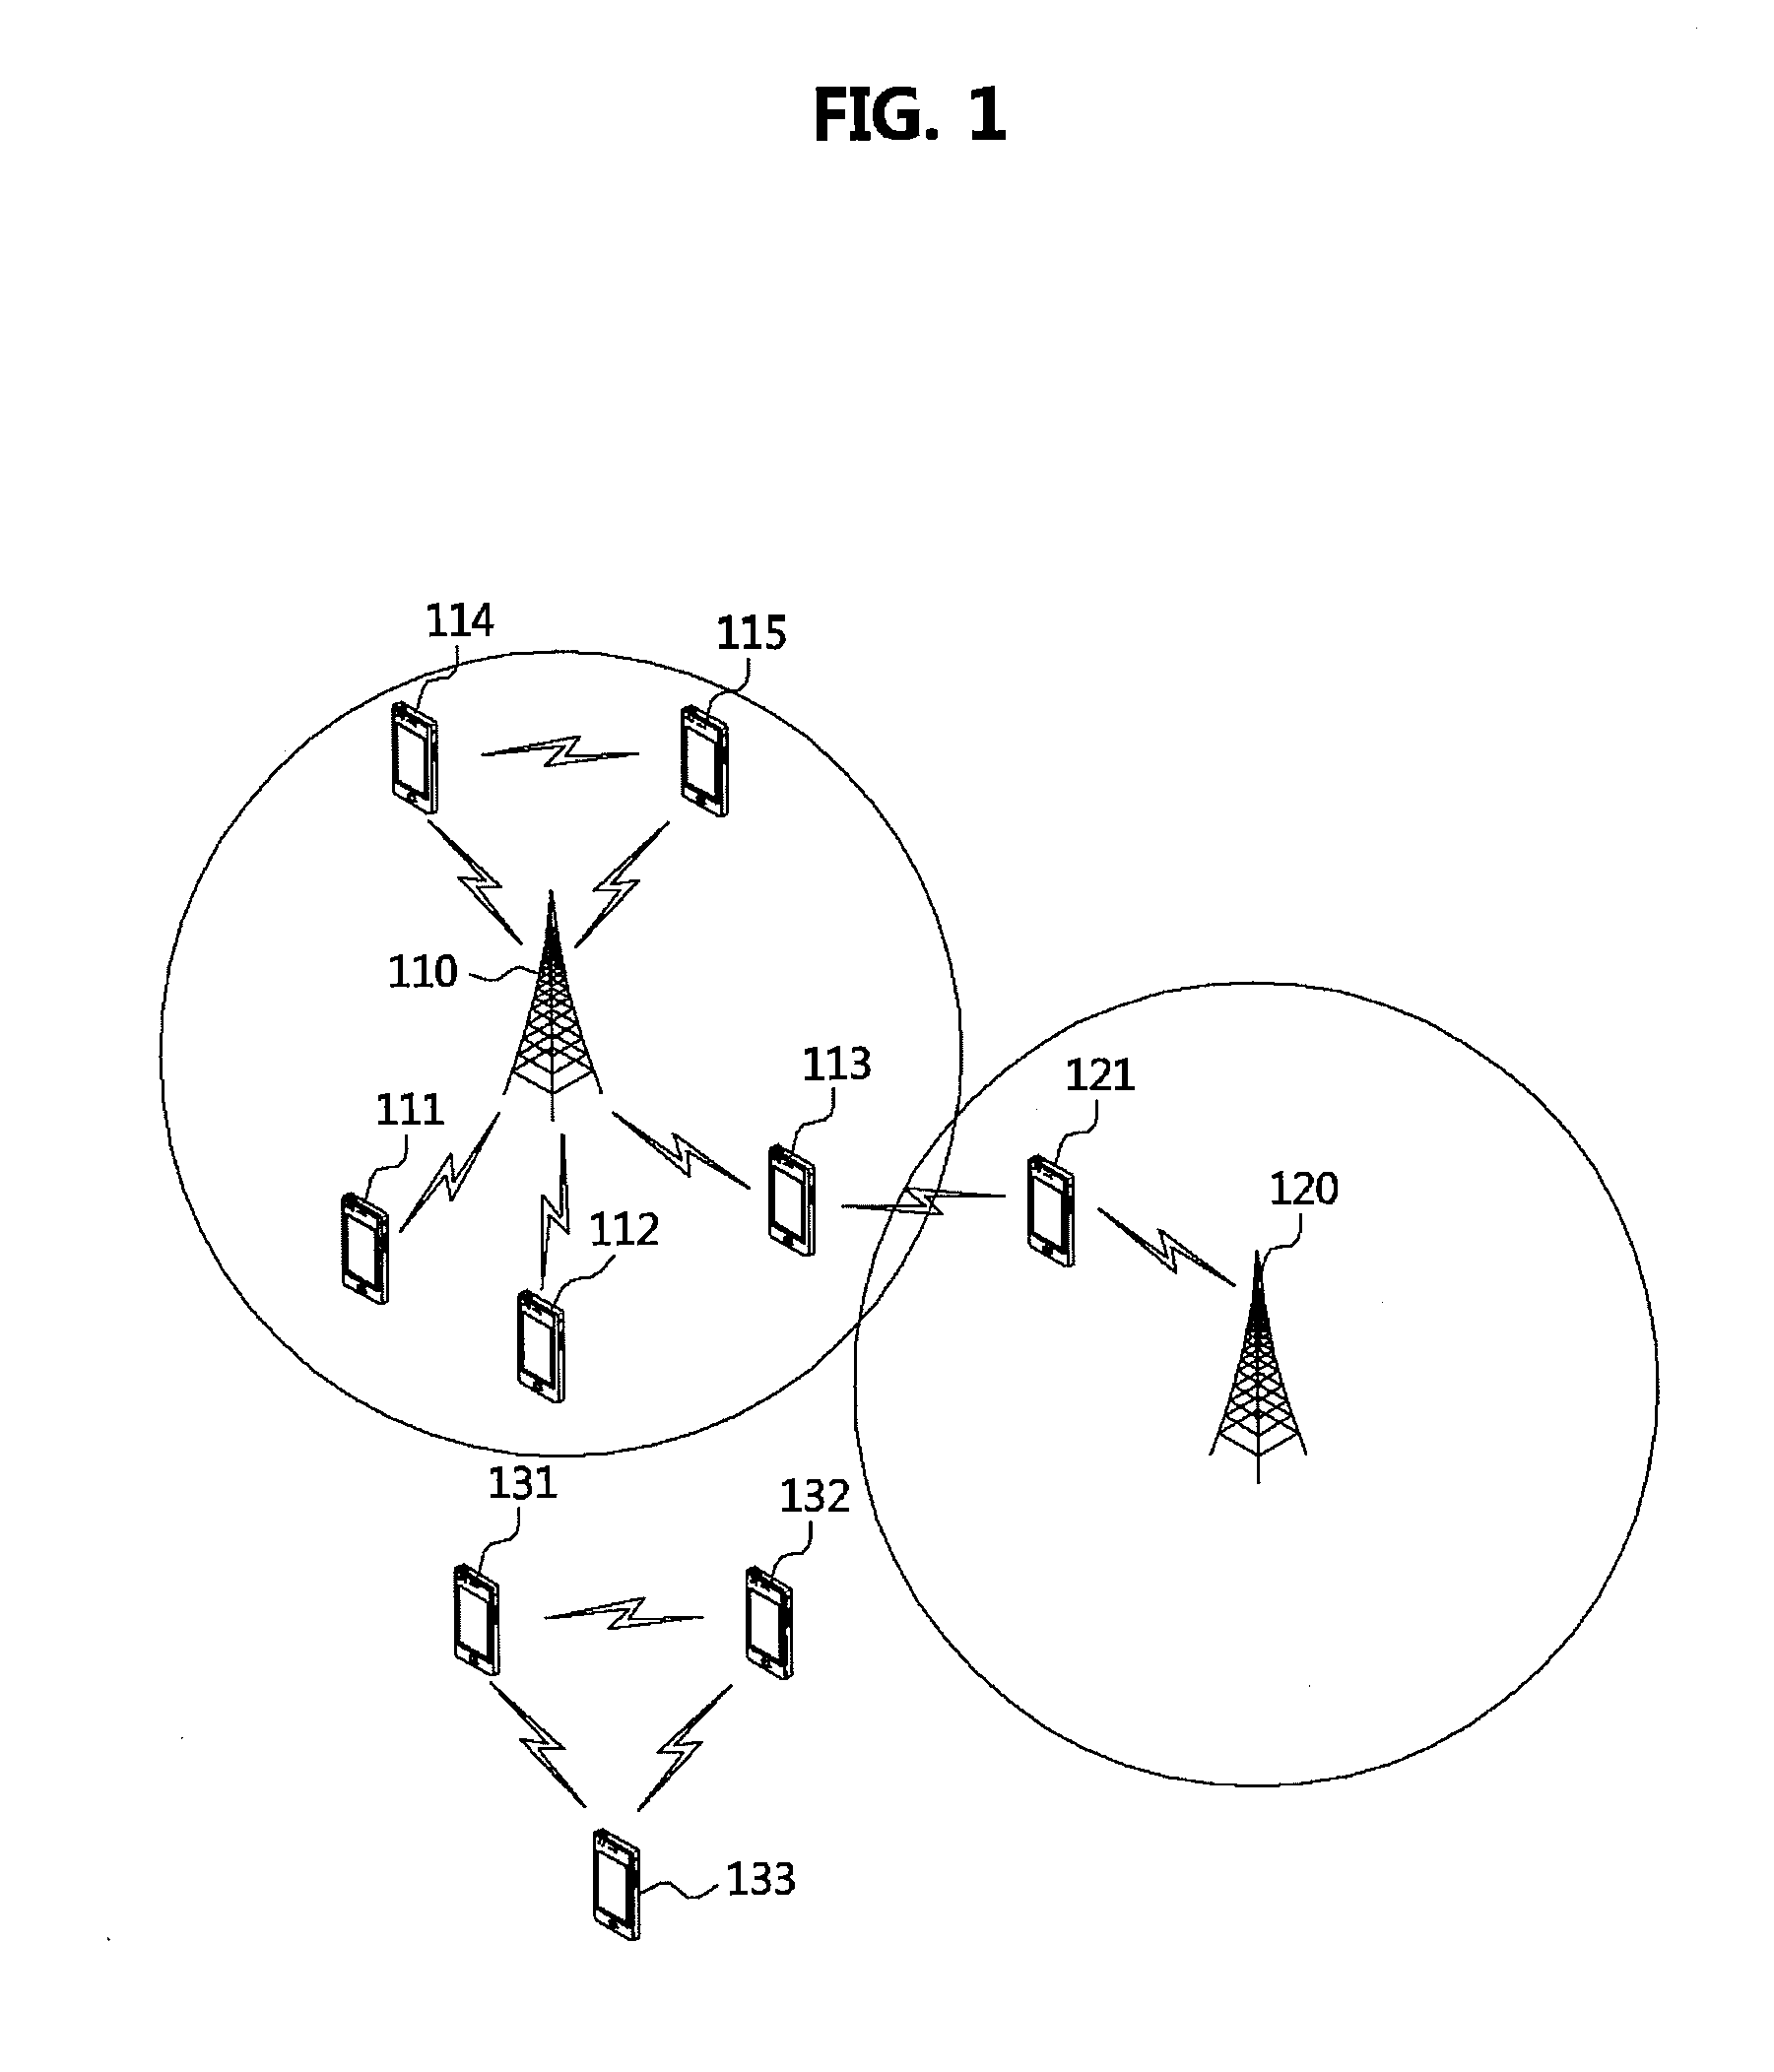 Method for peer discovery using device-to-device link